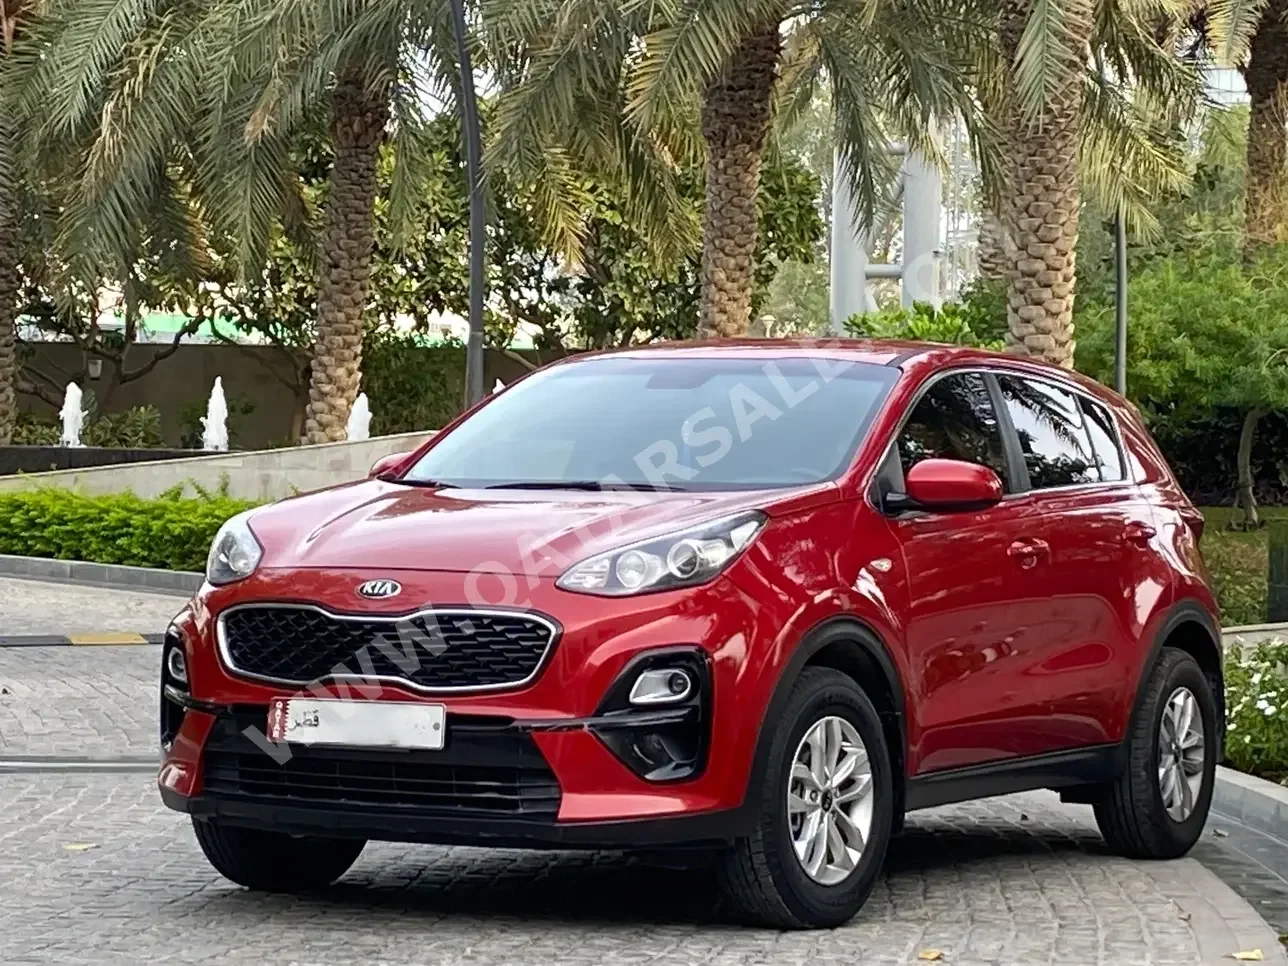 Kia  Sportage  2.0  2019  Automatic  181,000 Km  4 Cylinder  Front Wheel Drive (FWD)  SUV  Red